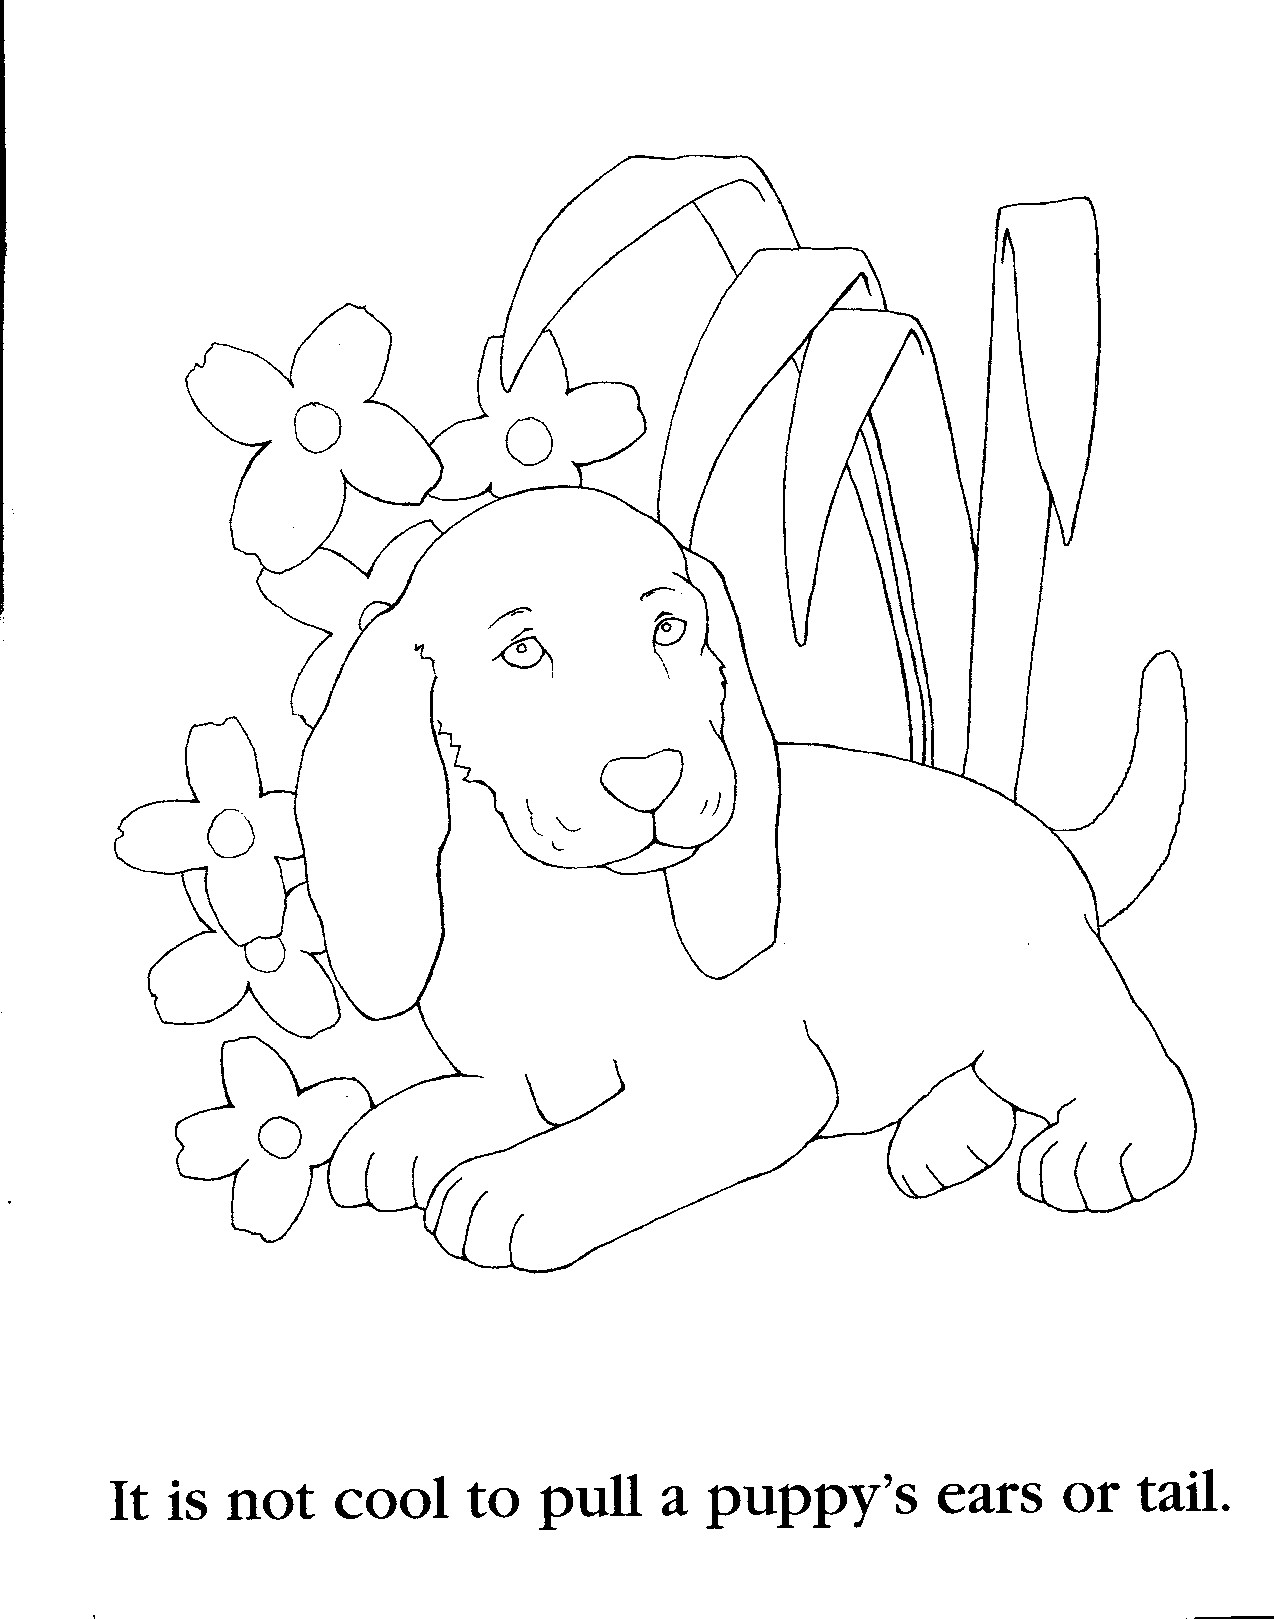 Coloring Pages For 10 Year Olds at GetDrawings Free download